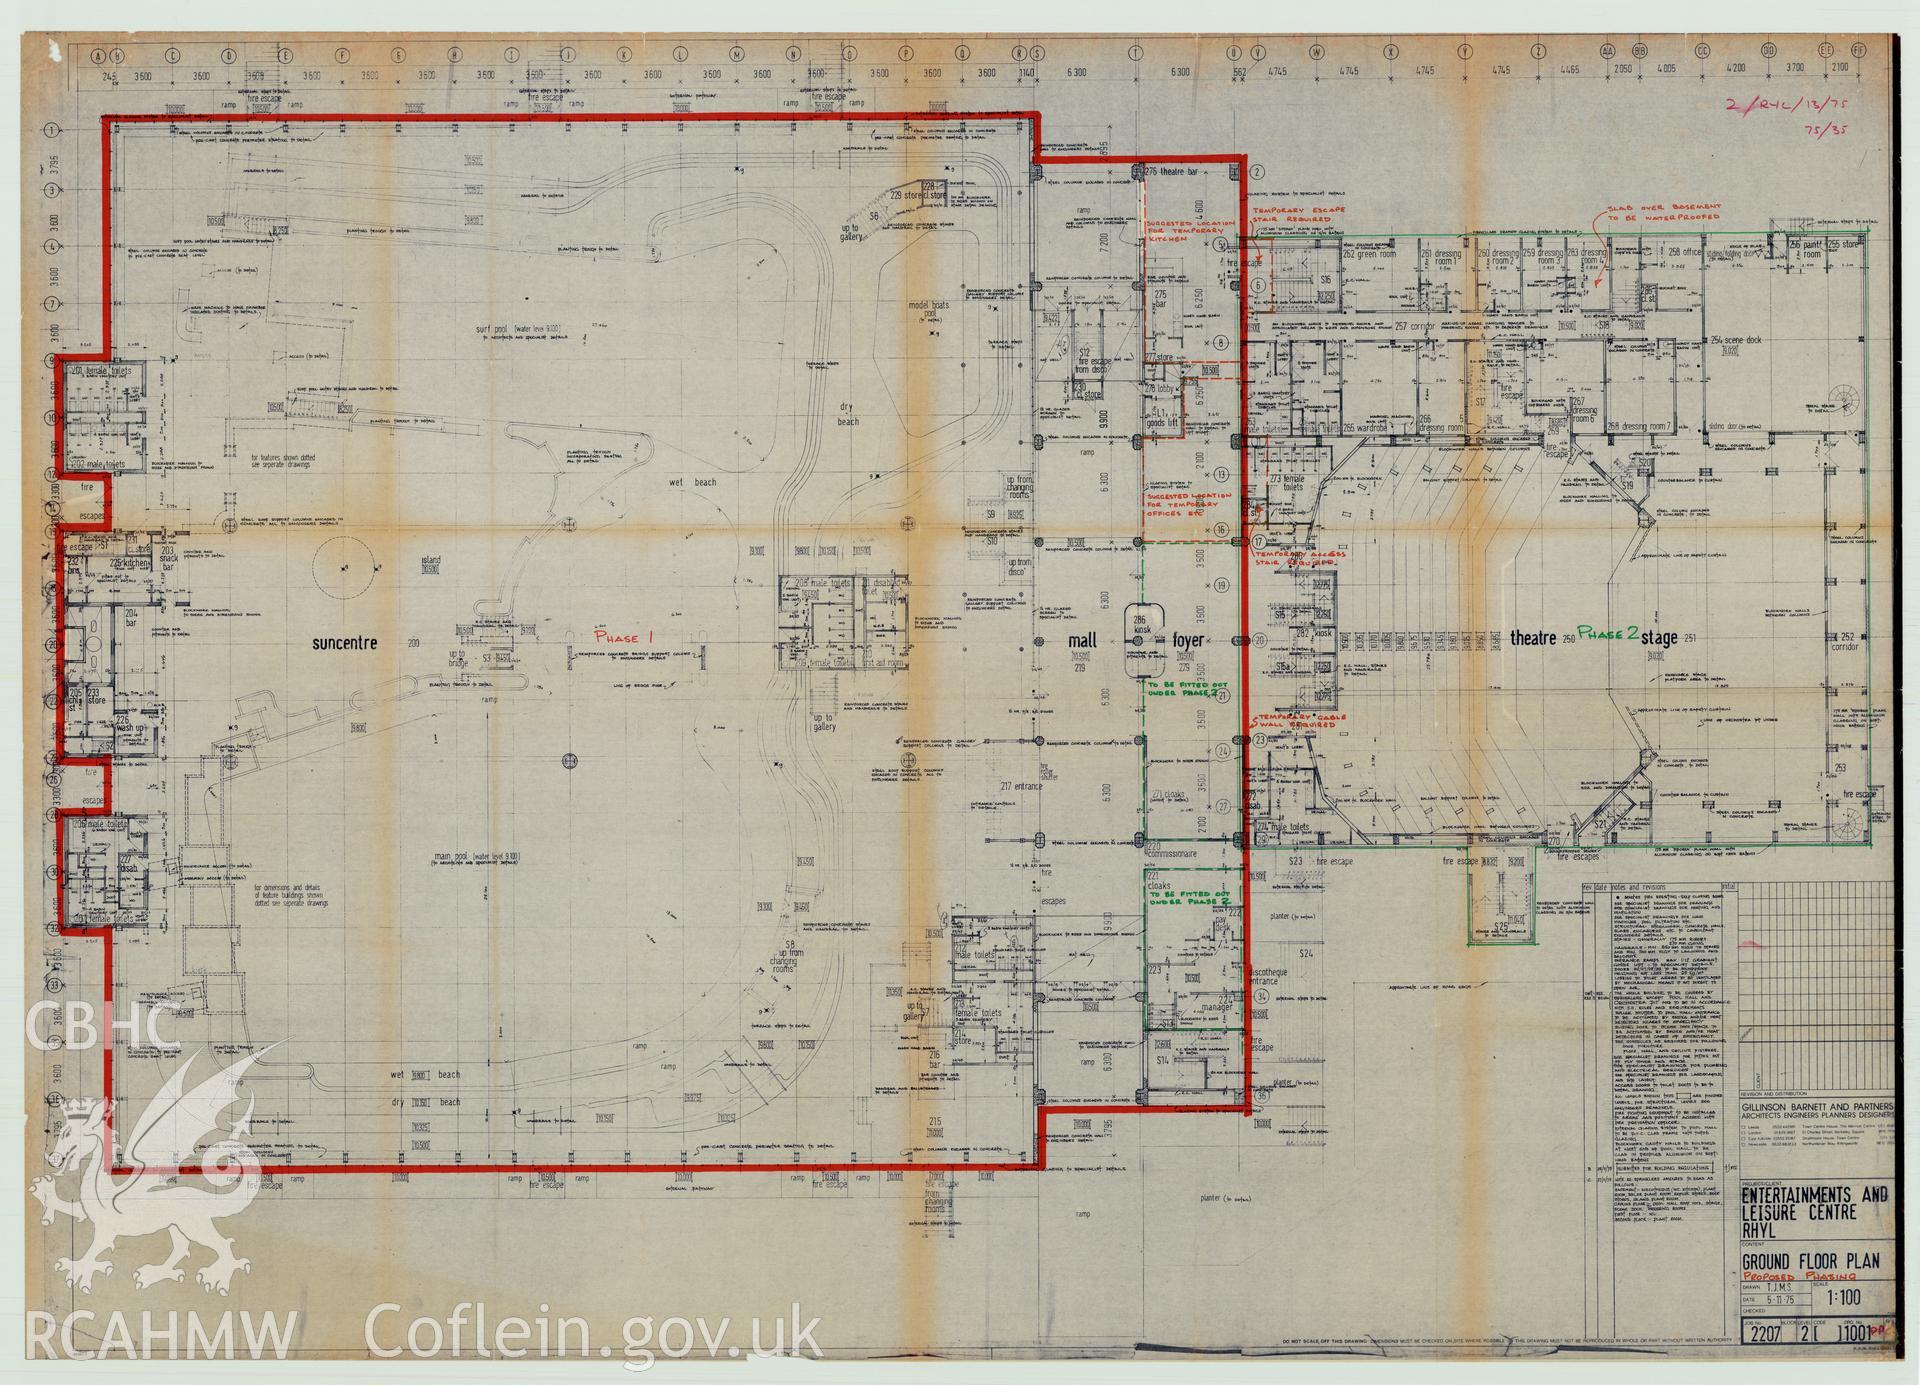 Digital copy of a measured drawing showing ground floor plan phasing proposals for the Sun Centre, Rhyl, produced by Gillinson Barnett and Partners. Loaned for copying by Denbighshire County Council.